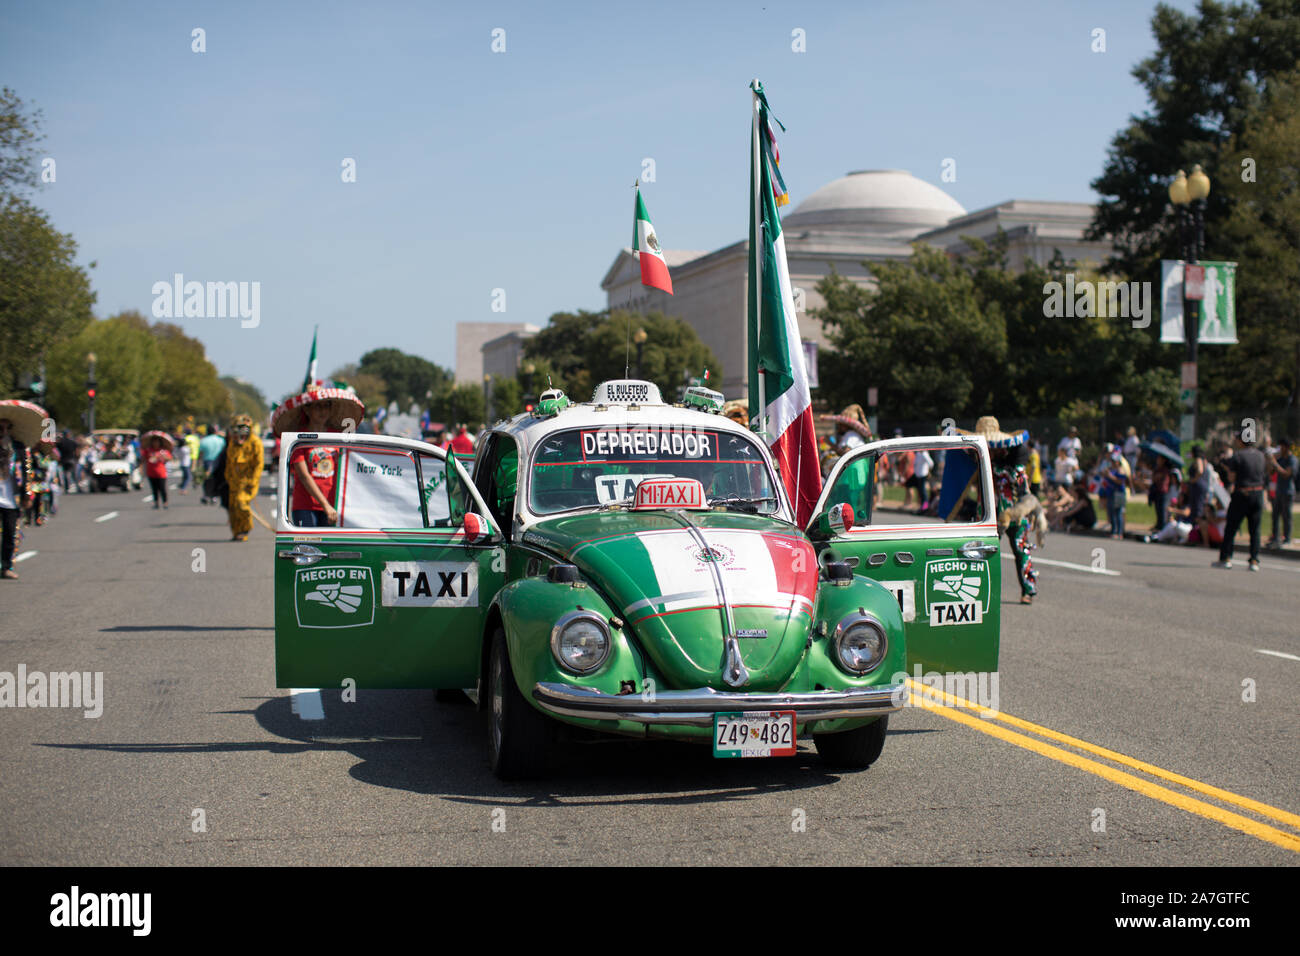 Washington DC, USA - September 21, 2019: The Fiesta DC, Mexican Beetle Taxi, carrying mexican flags during the parade Stock Photo